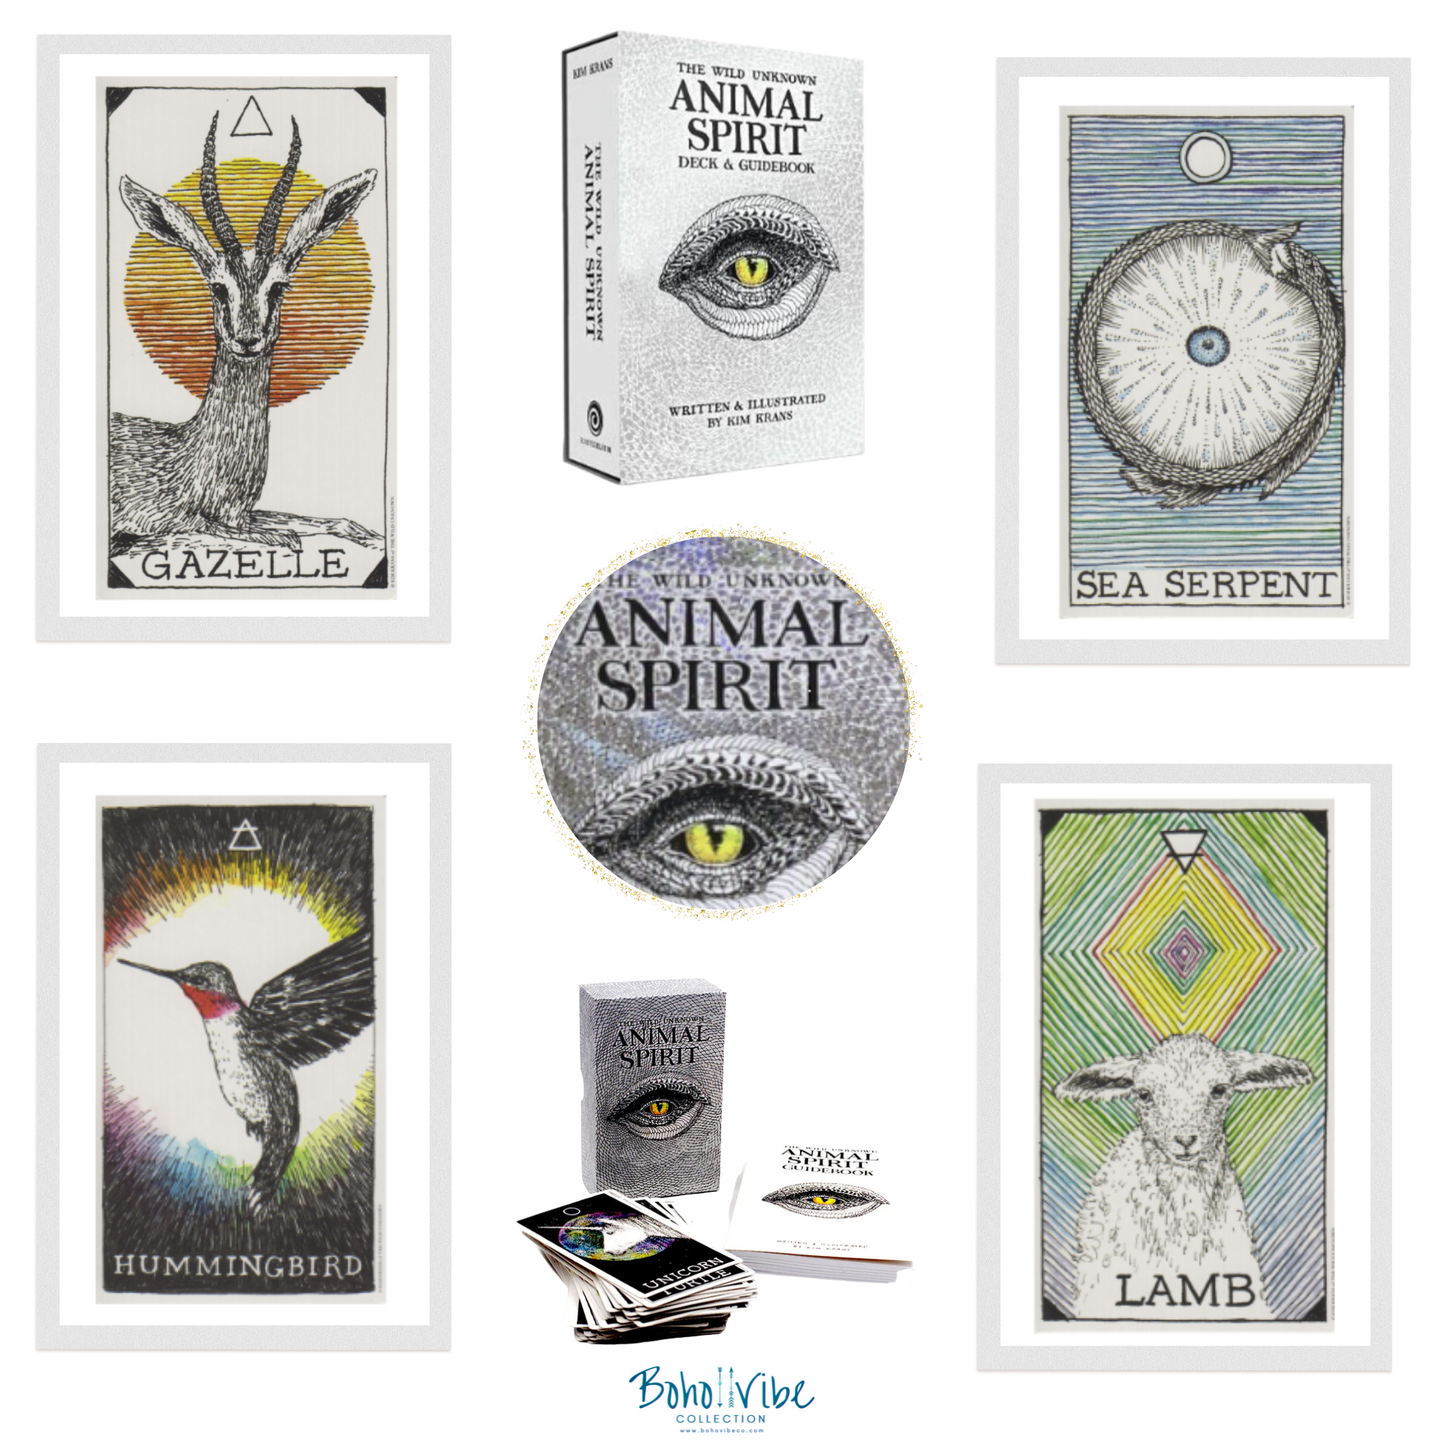 Boho ↡↟ Vibe Collection ↠ The Wild Unknown Animal Spirit Deck and Guidebook